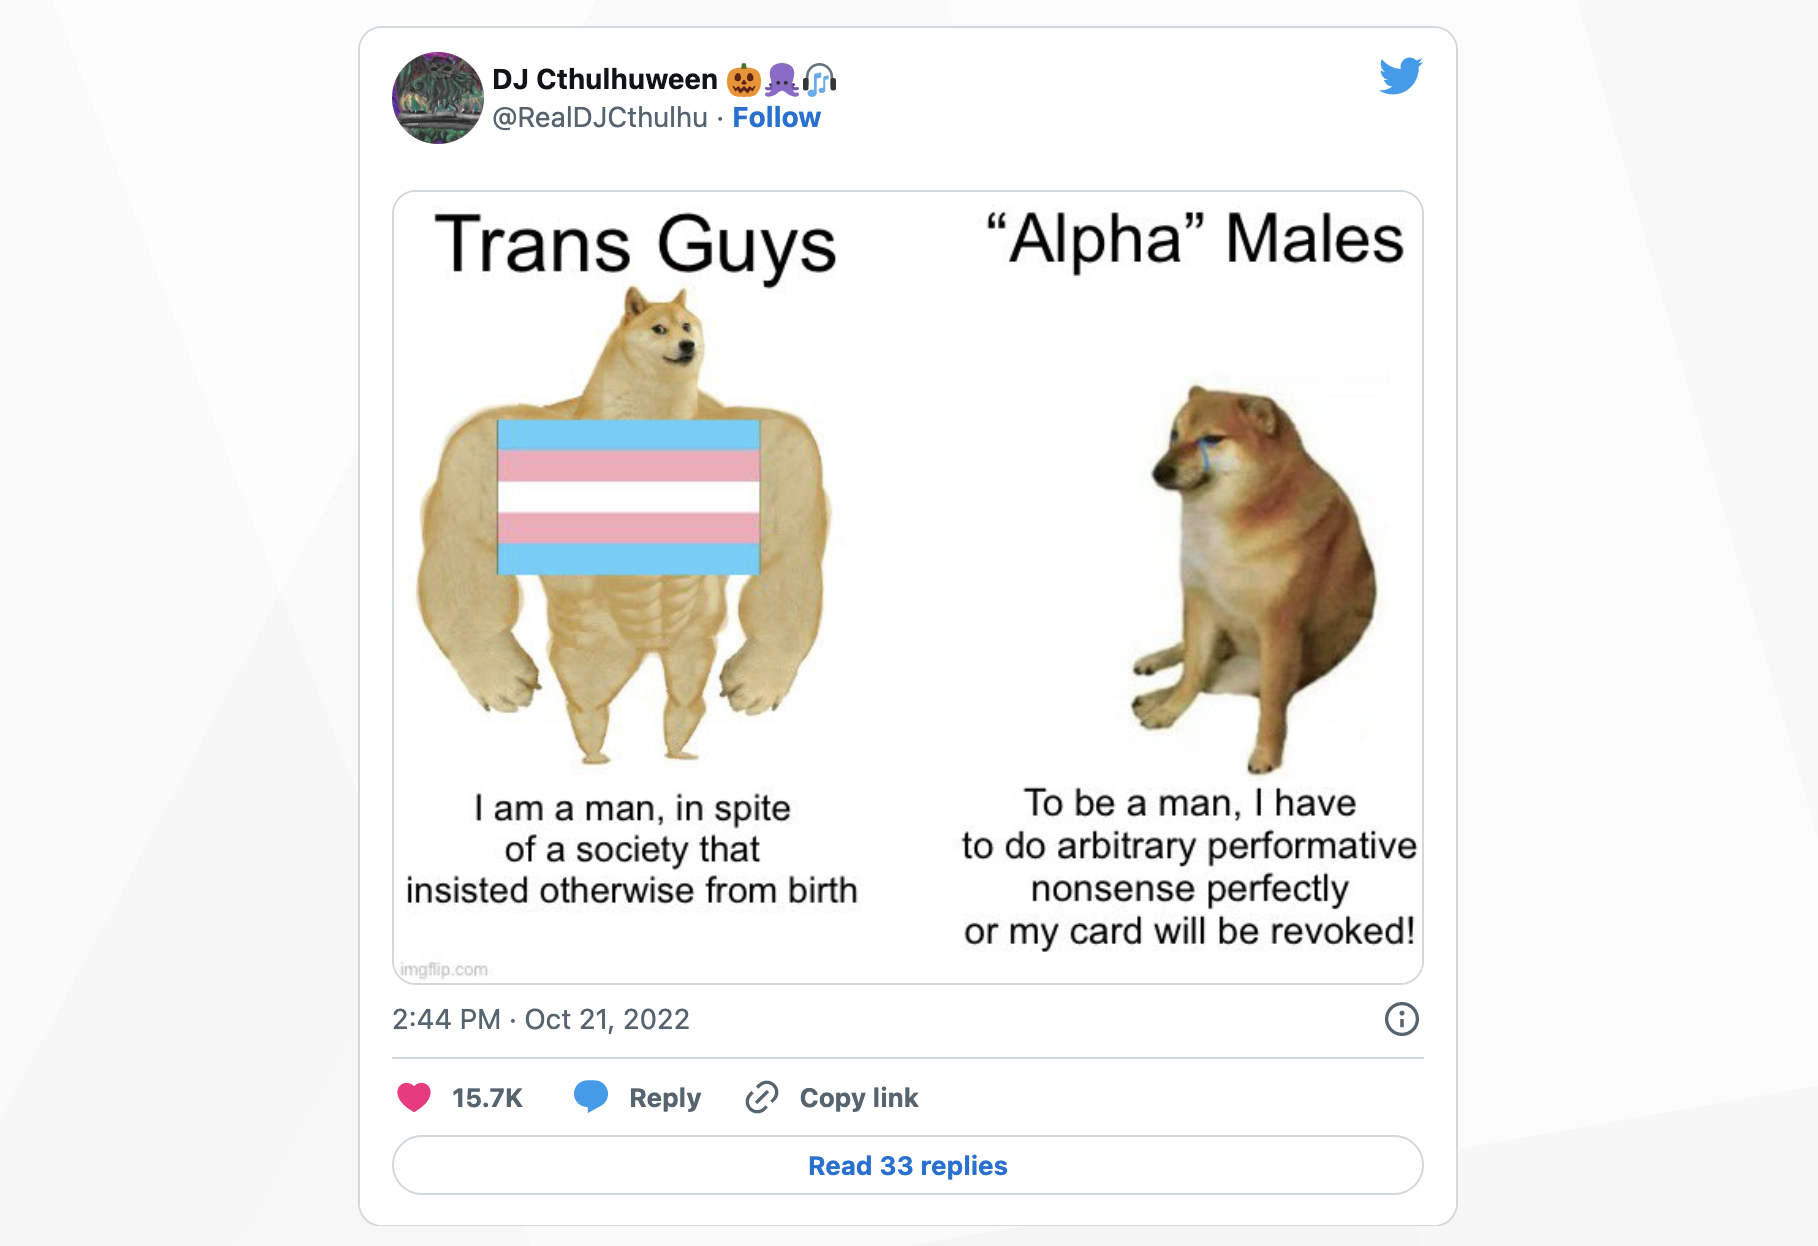 Screenshot of a tweet quoted below. A meme with a muscular doge labeled “Trans Guys – I am a man, in spite of a society that insisted otherwise from birth” and a sad doge labeled “Alpha Males – To be a man, I have to do arbitrary performative nonsense perfectly or my card will be revoked!”